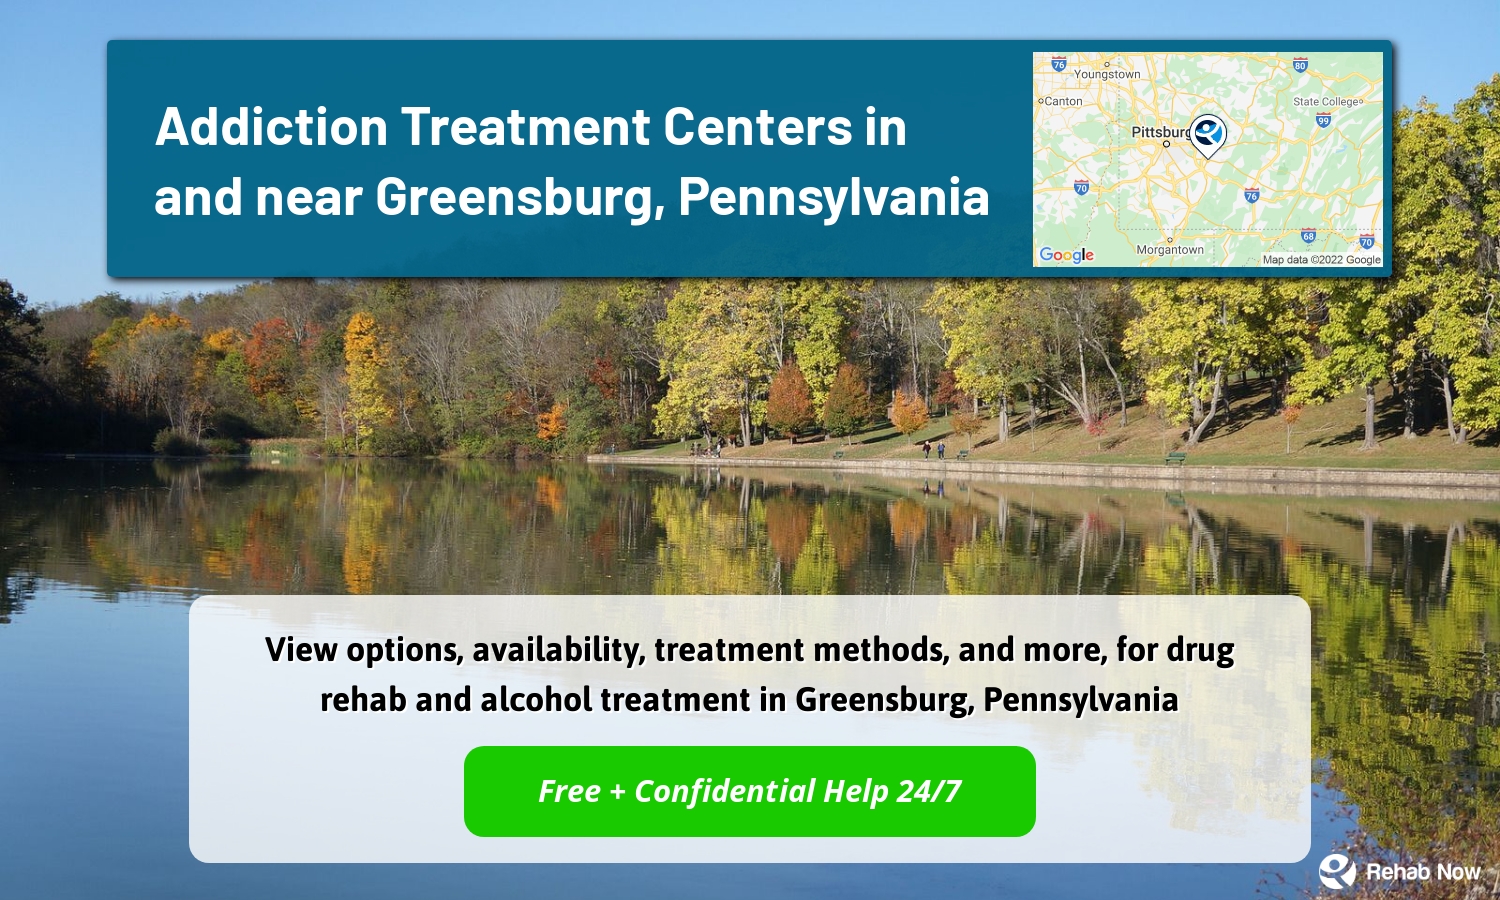 View options, availability, treatment methods, and more, for drug rehab and alcohol treatment in Greensburg, Pennsylvania